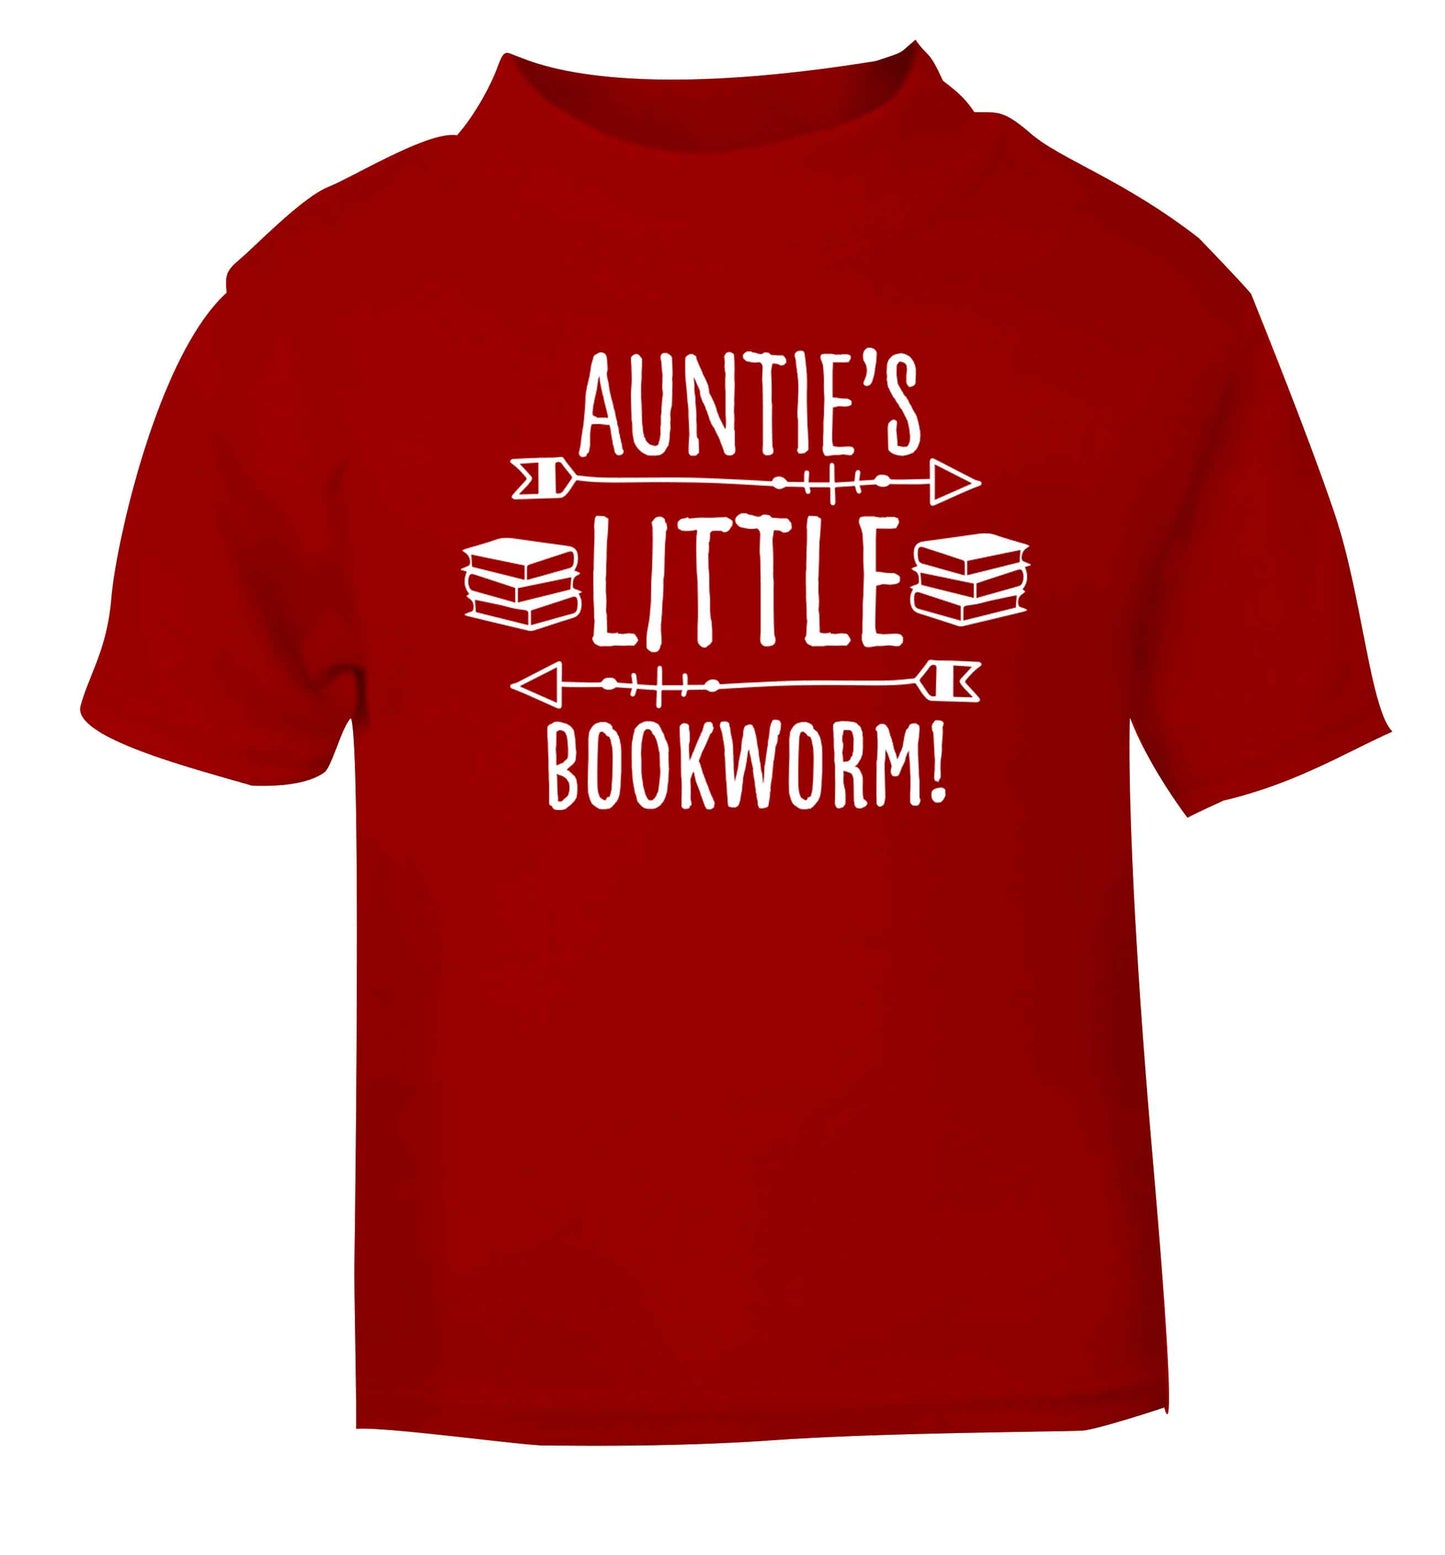 Auntie's little bookworm red baby toddler Tshirt 2 Years